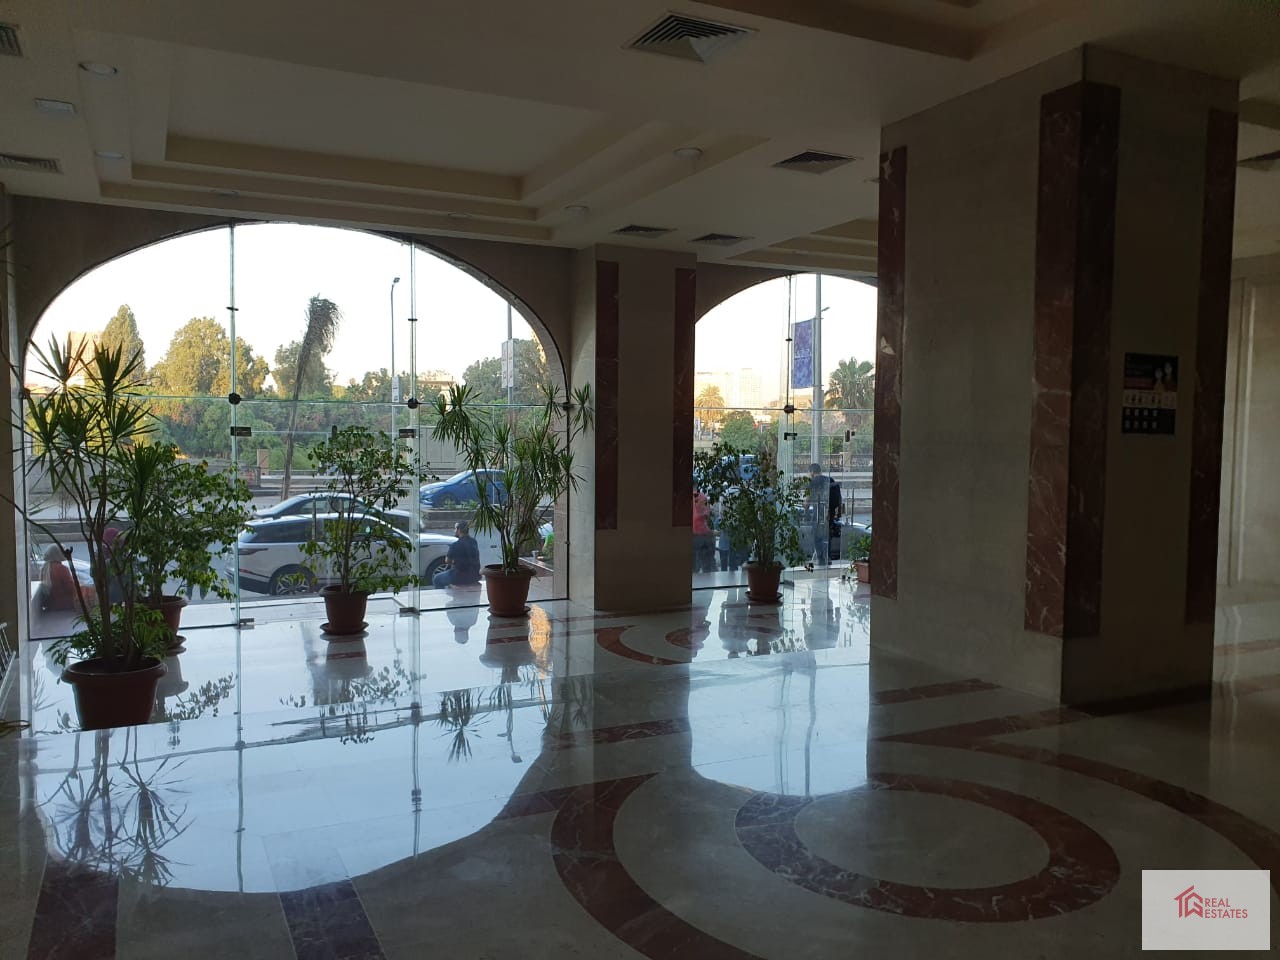 Apartment for rent in Nile View Panaromic Agouza, Giza , Egypt Area: 472 m It consists of 4 rooms, 2 of them with bathroom Rental